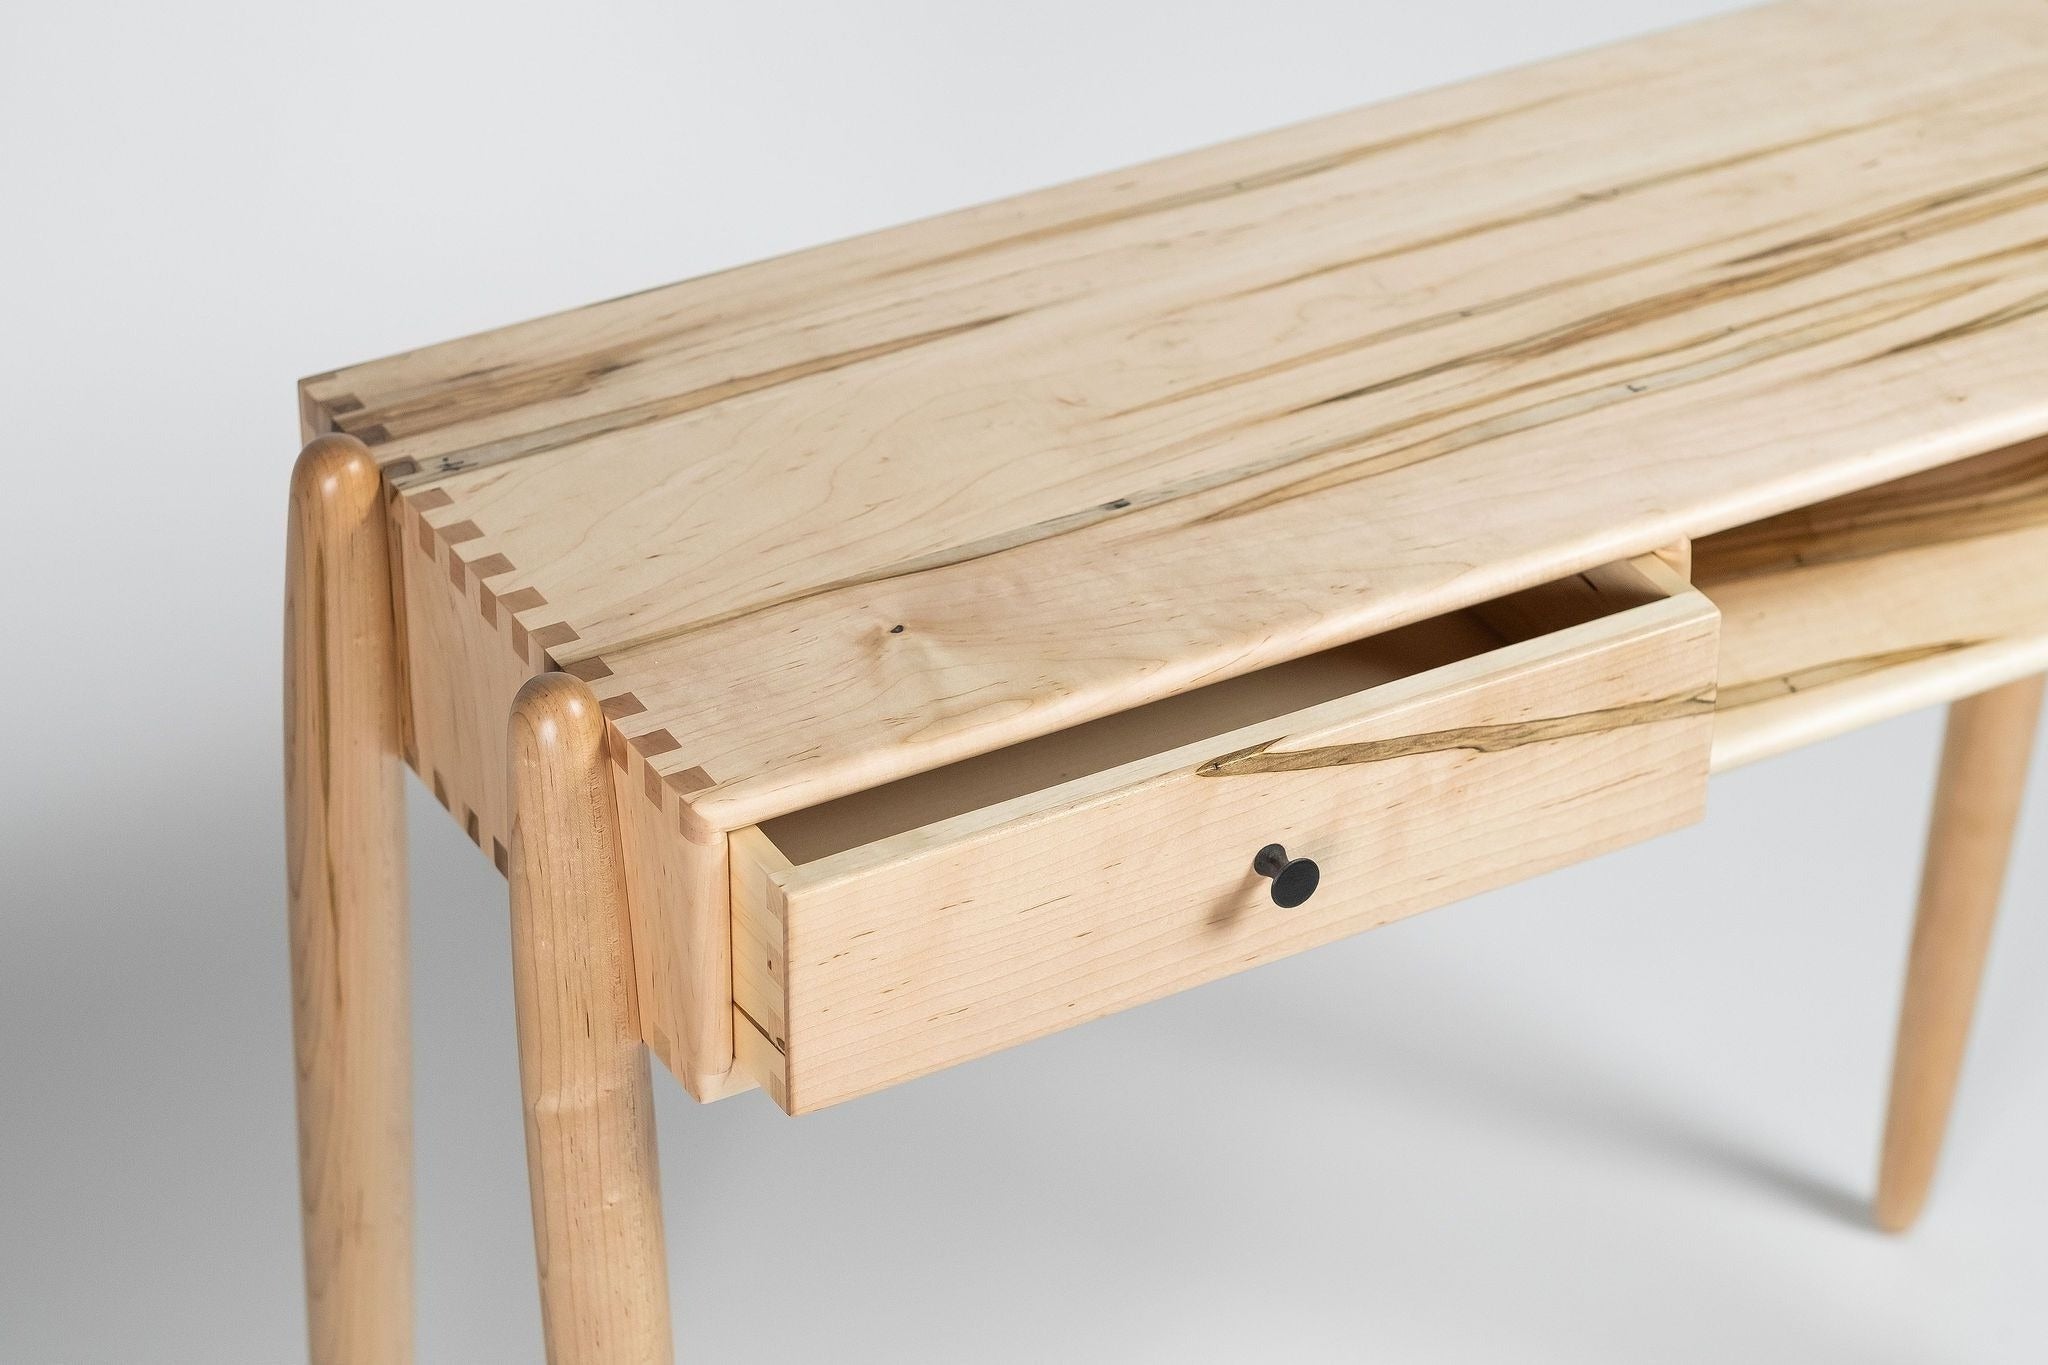 Solomon midcentury modern maple wood Console Desk handcrafted by Hunt & Noyer in Michigan